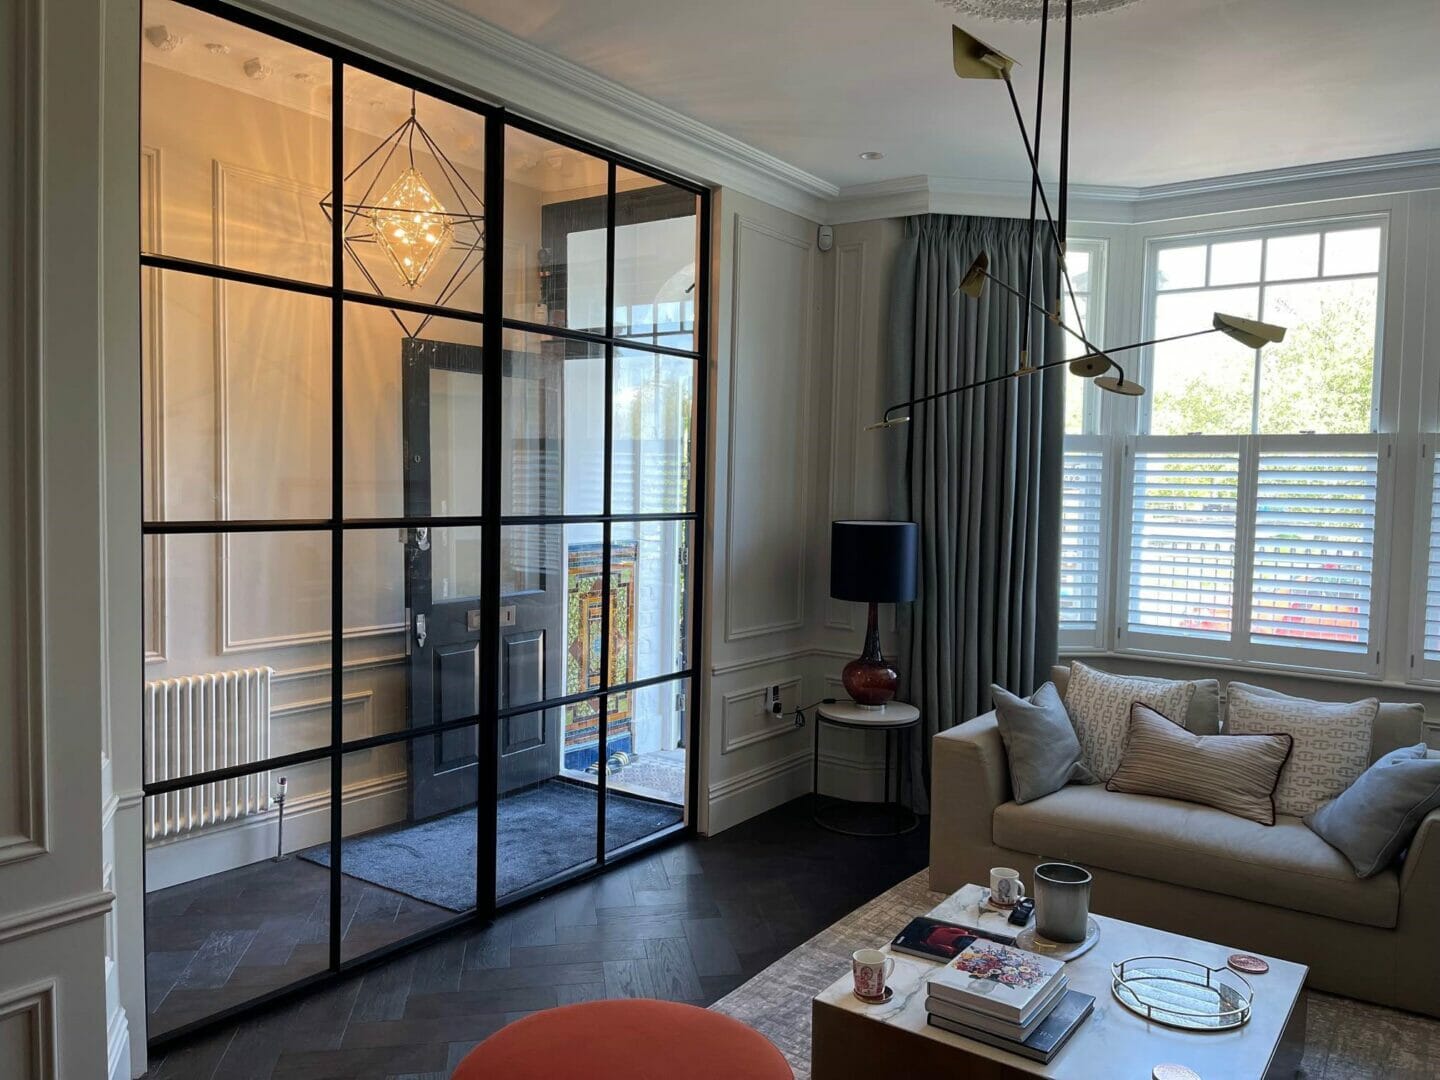 SNUG FIT – Individual style is in and creating a snug room is a great way to show it – says Crittall Windows.